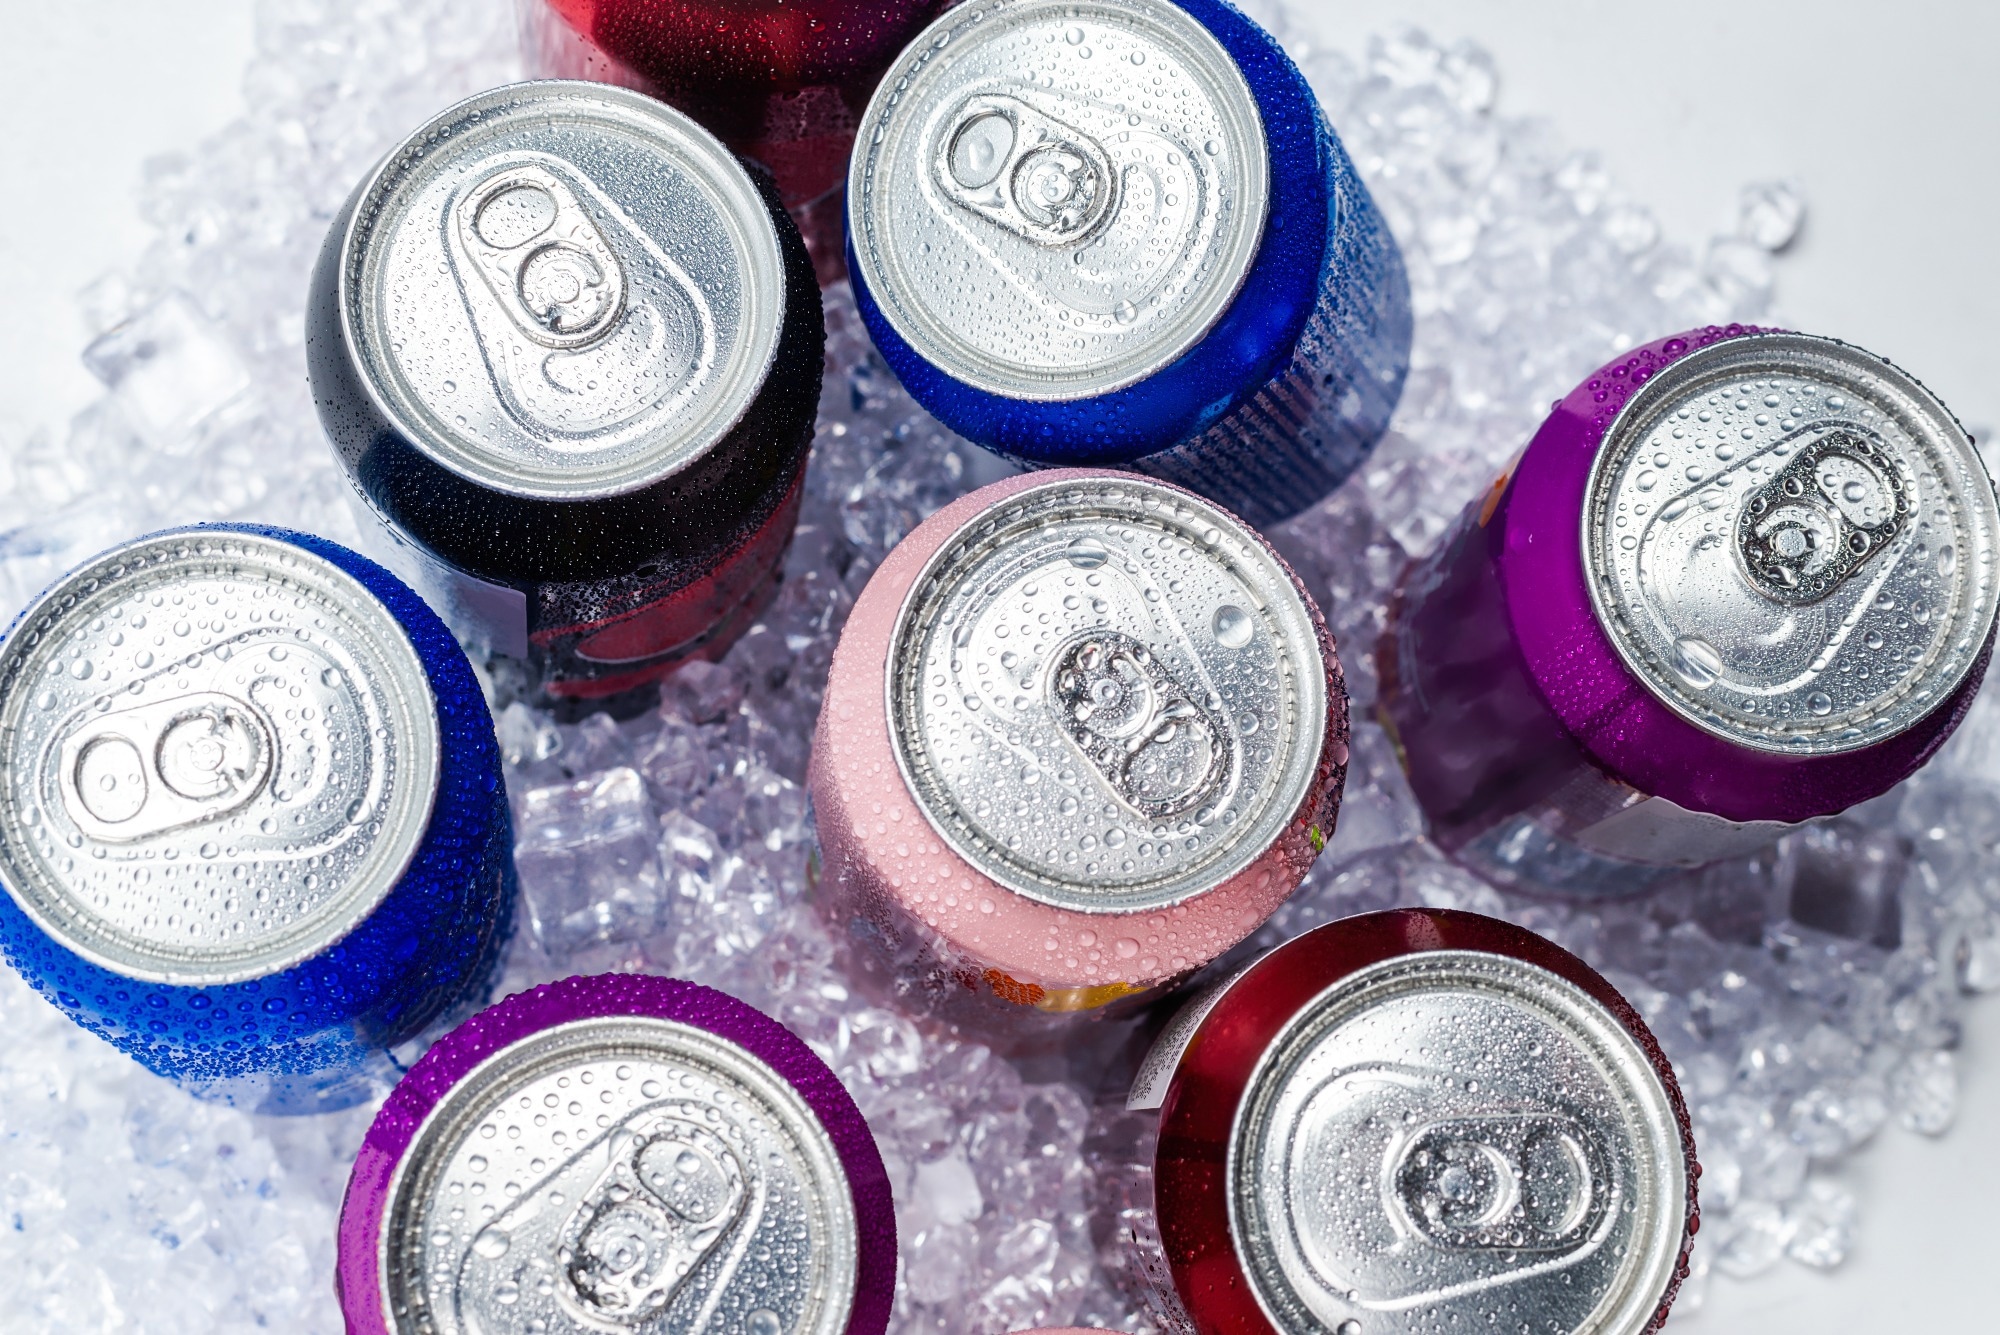 Study: Consumption Patterns of Energy Drinks in University Students: a Systematic Review and Meta-analysis. Image Credit: Holiday.Photo.Top/Shutterstock